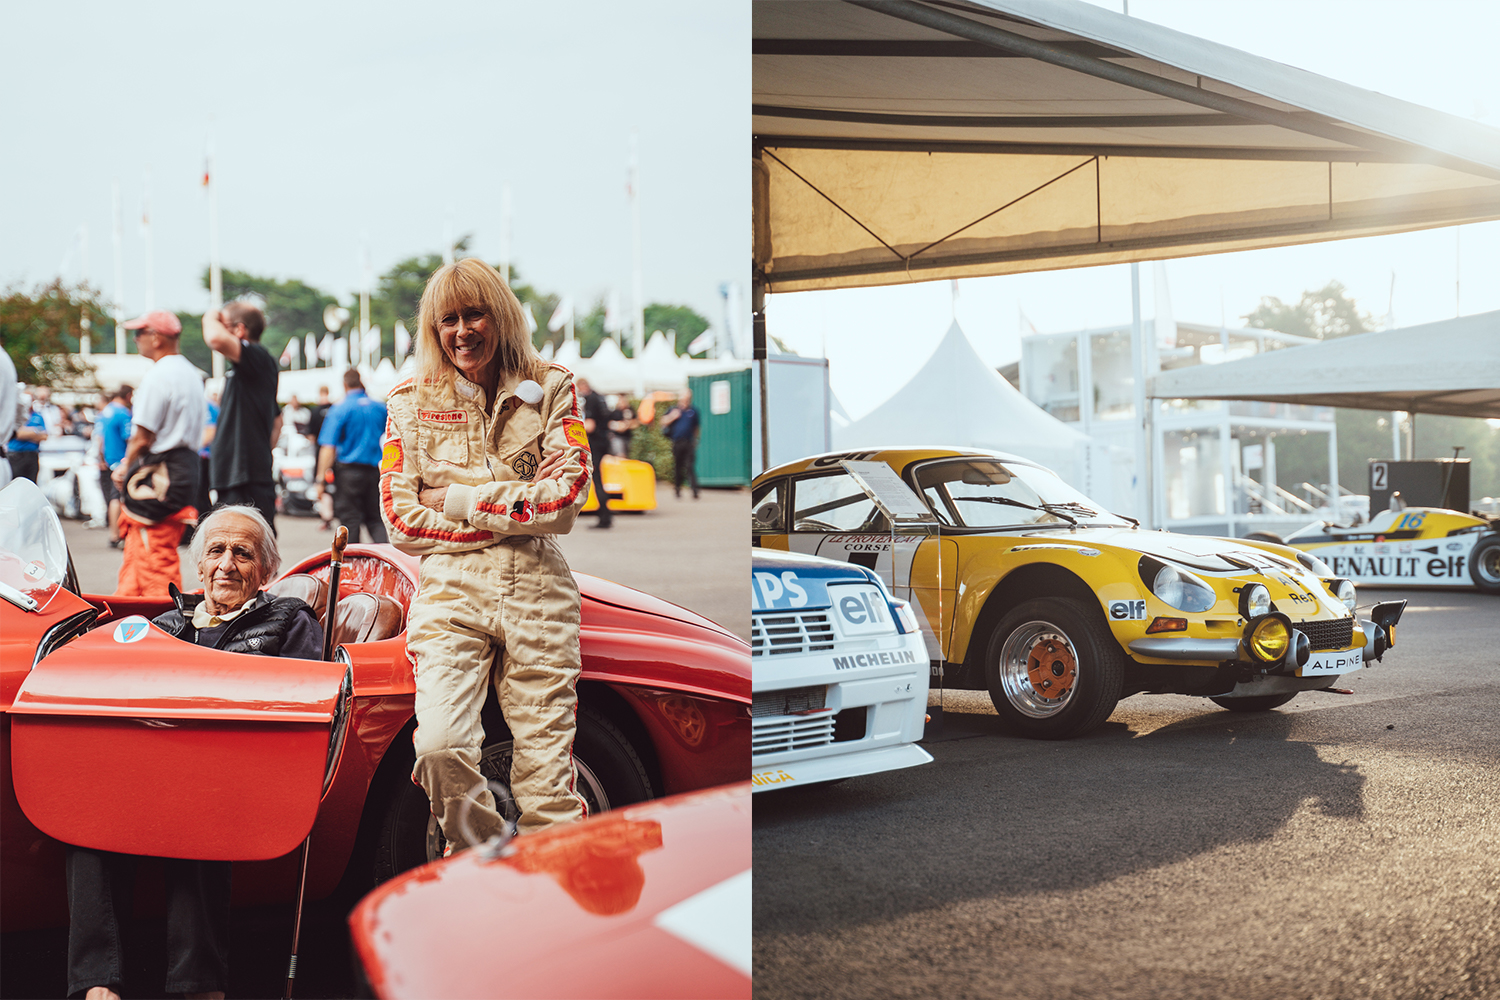 A man and a woman in a classic car at the 2022 Goodwood Festival of Speed on the left. On the right, vintage cars displayed underneath a tent.